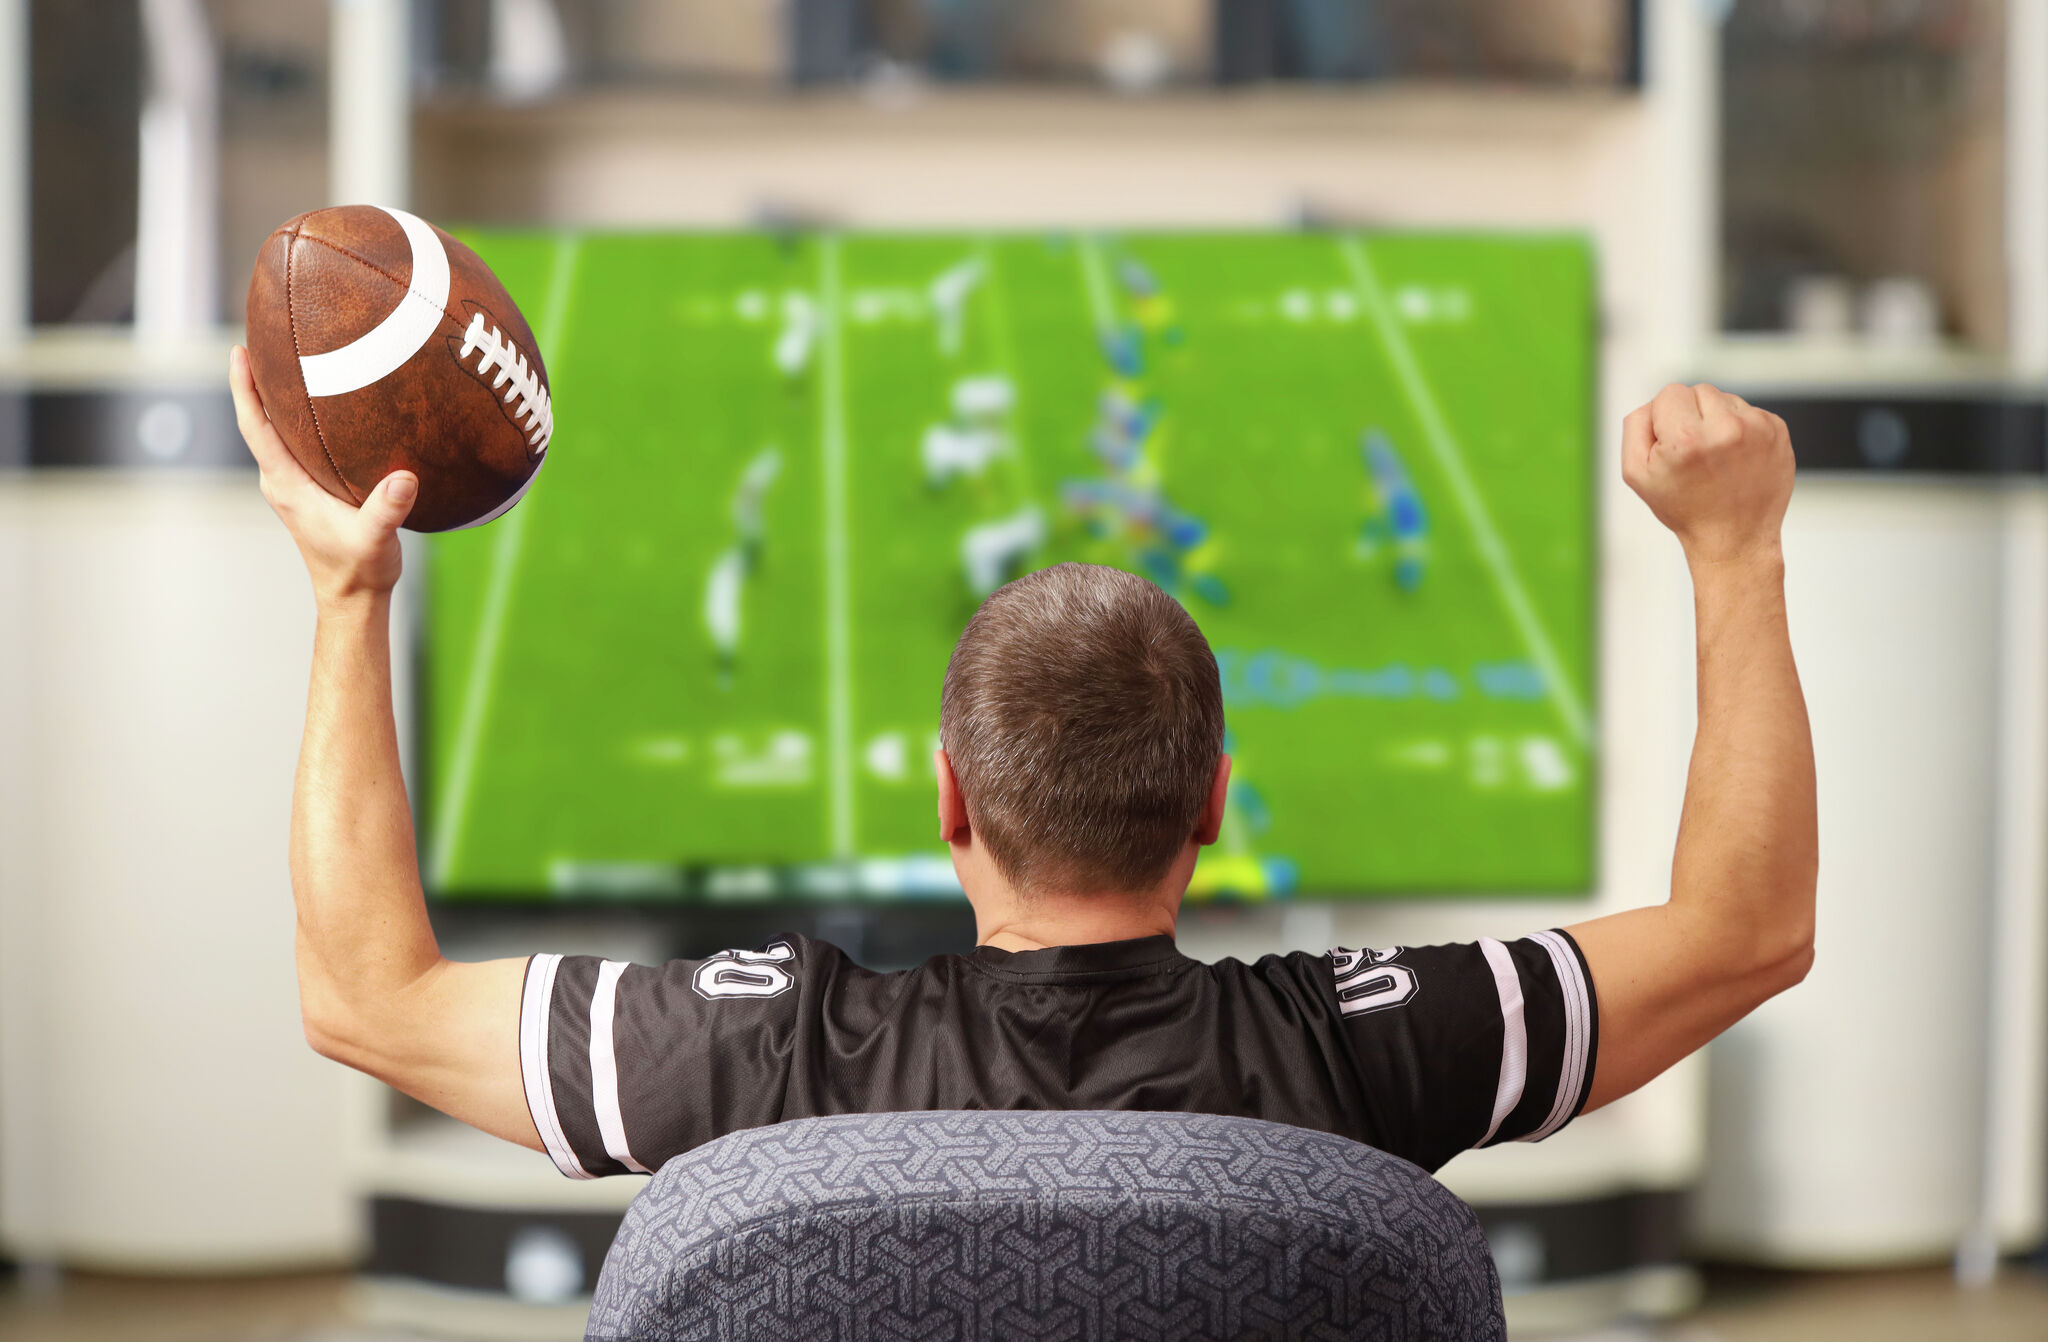 How to Watch Out-of-Market NFL Games in 2023